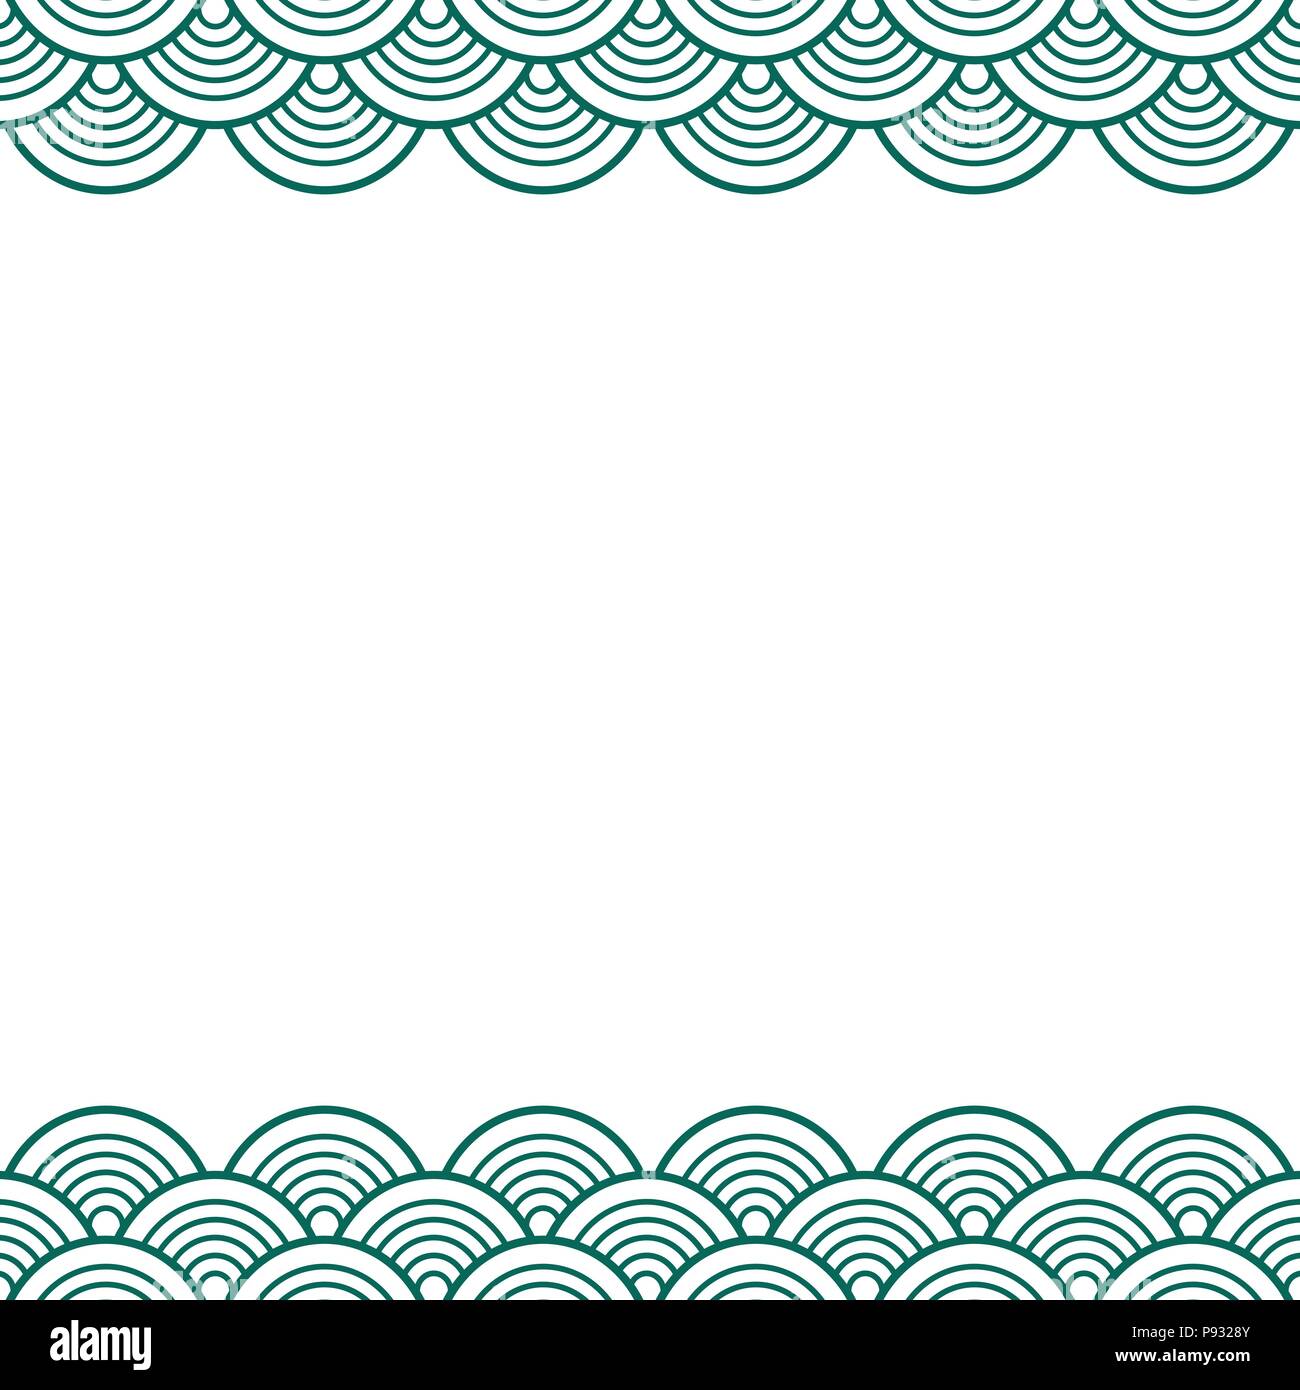 White Green Traditional Wave Japanese Chinese Seigaiha Border. Vector